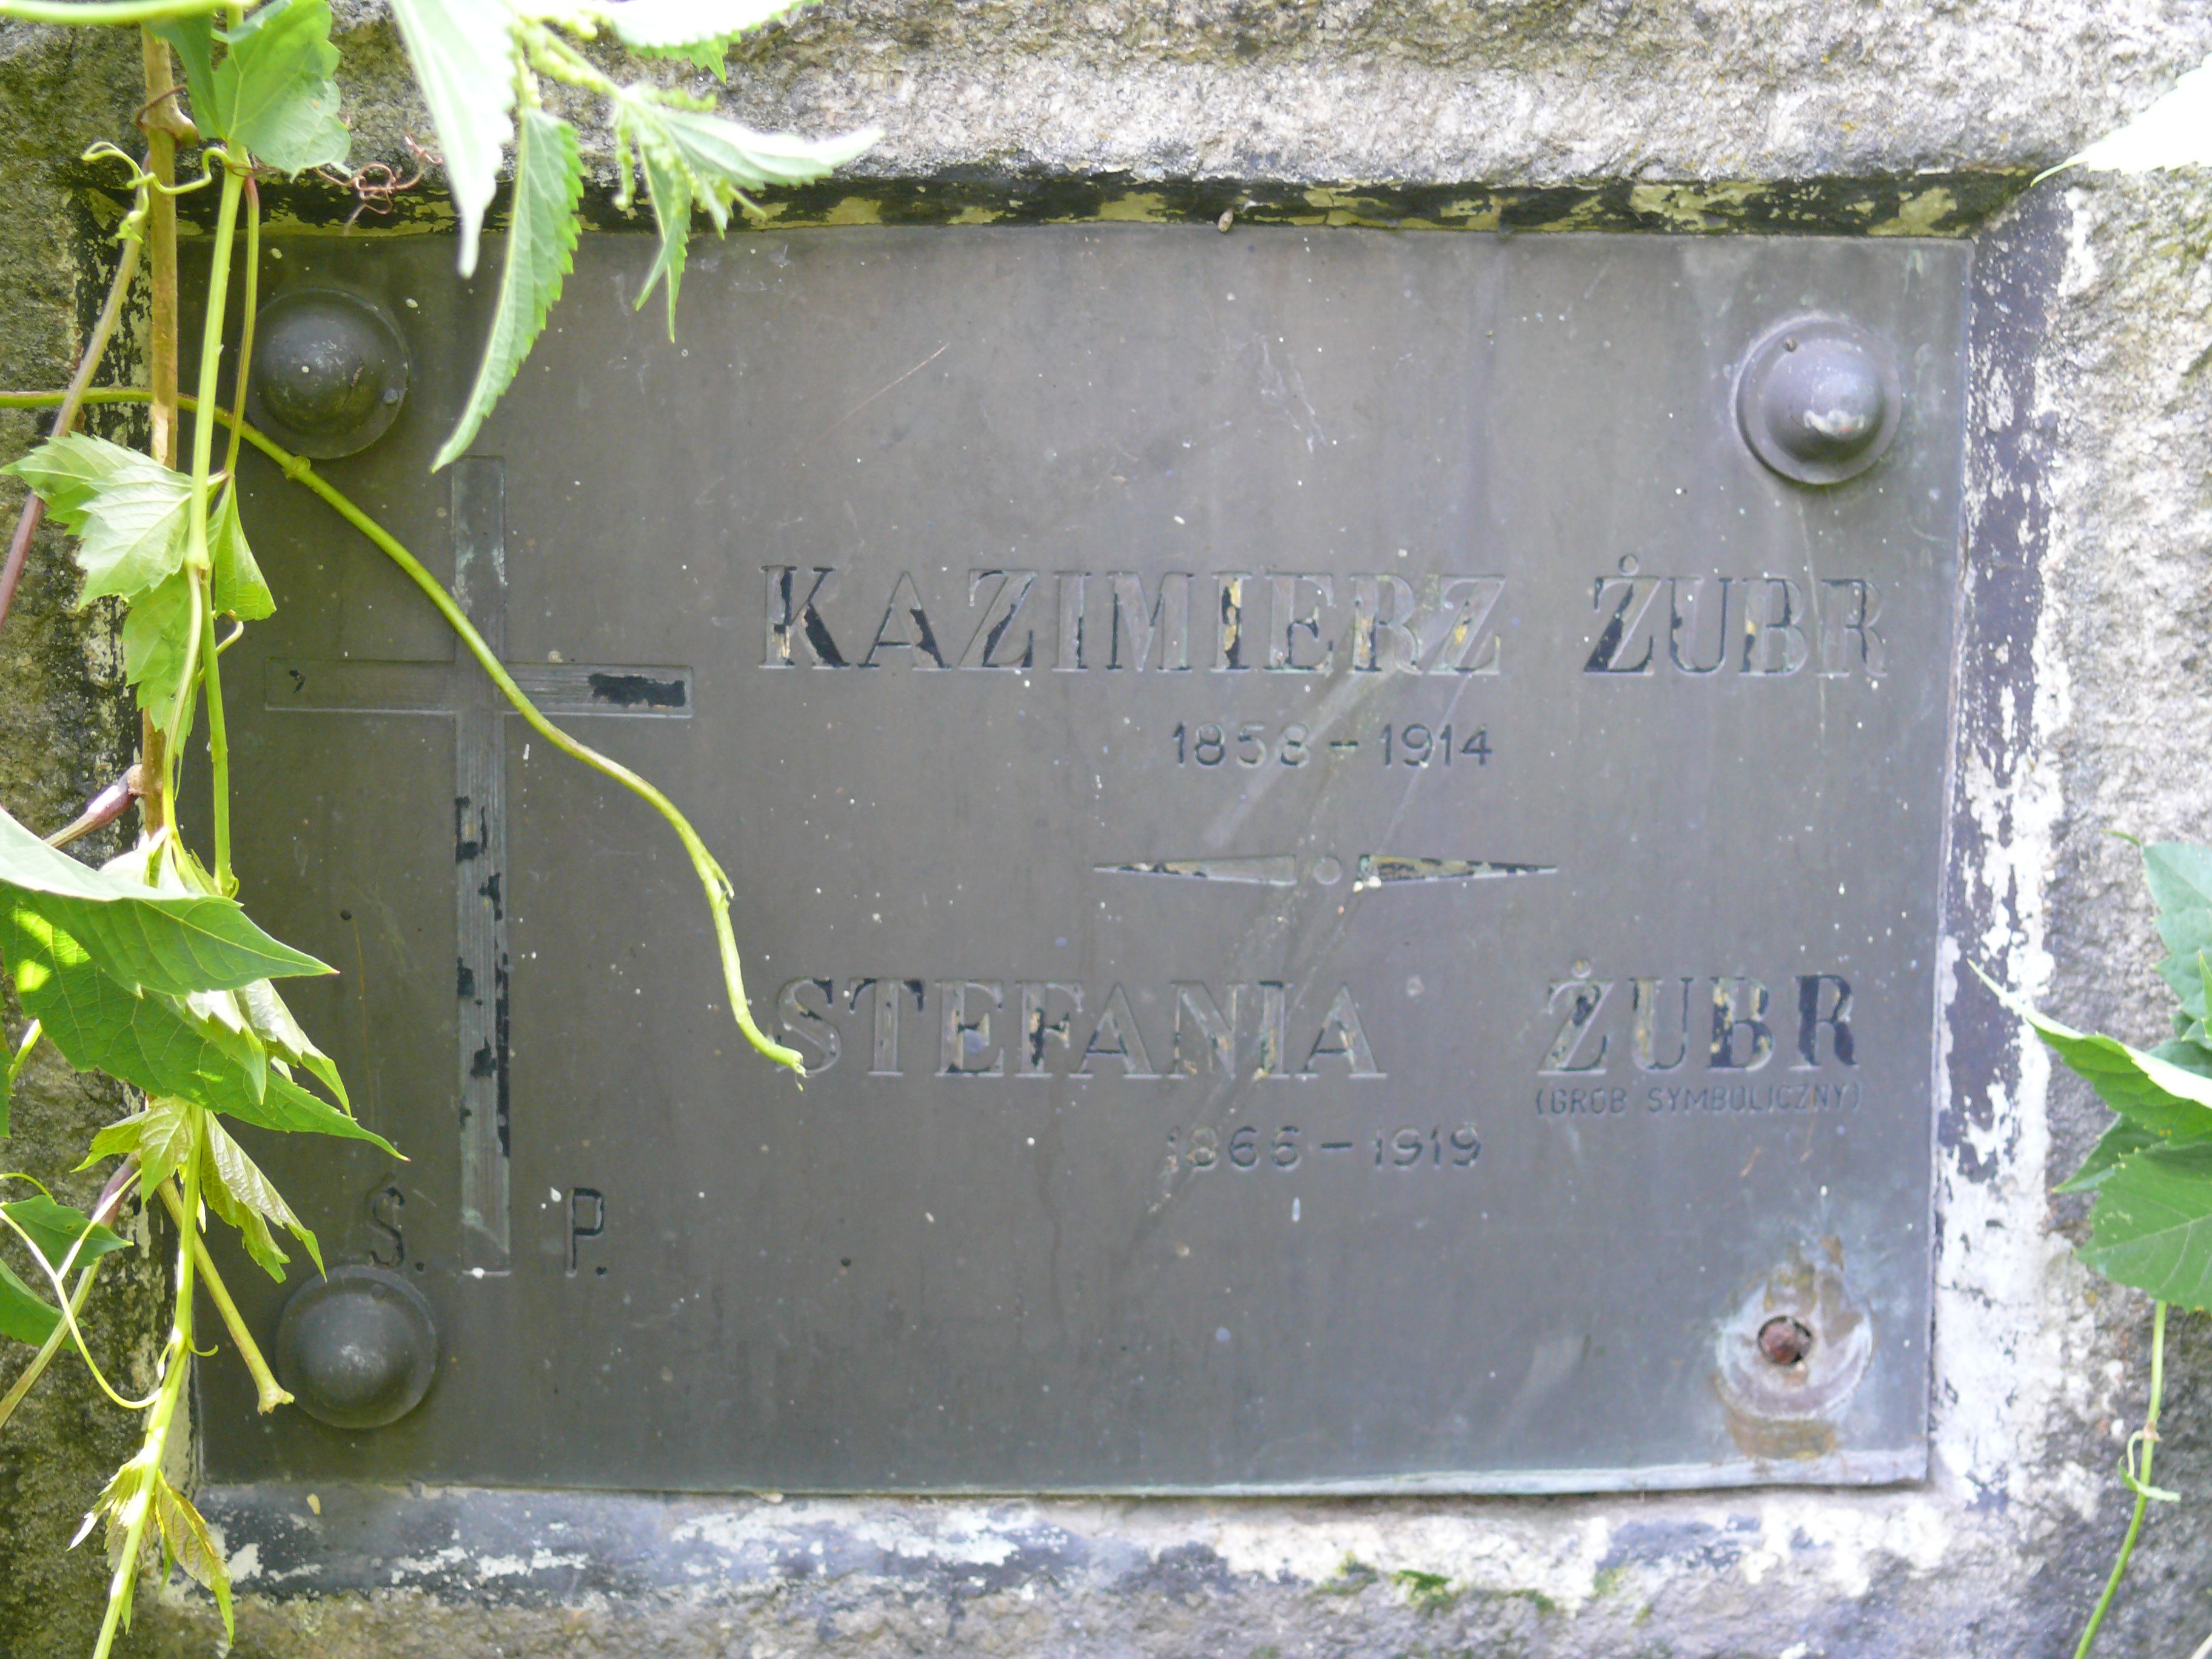 Inscription from the tombstone of Kazimierz Żubr